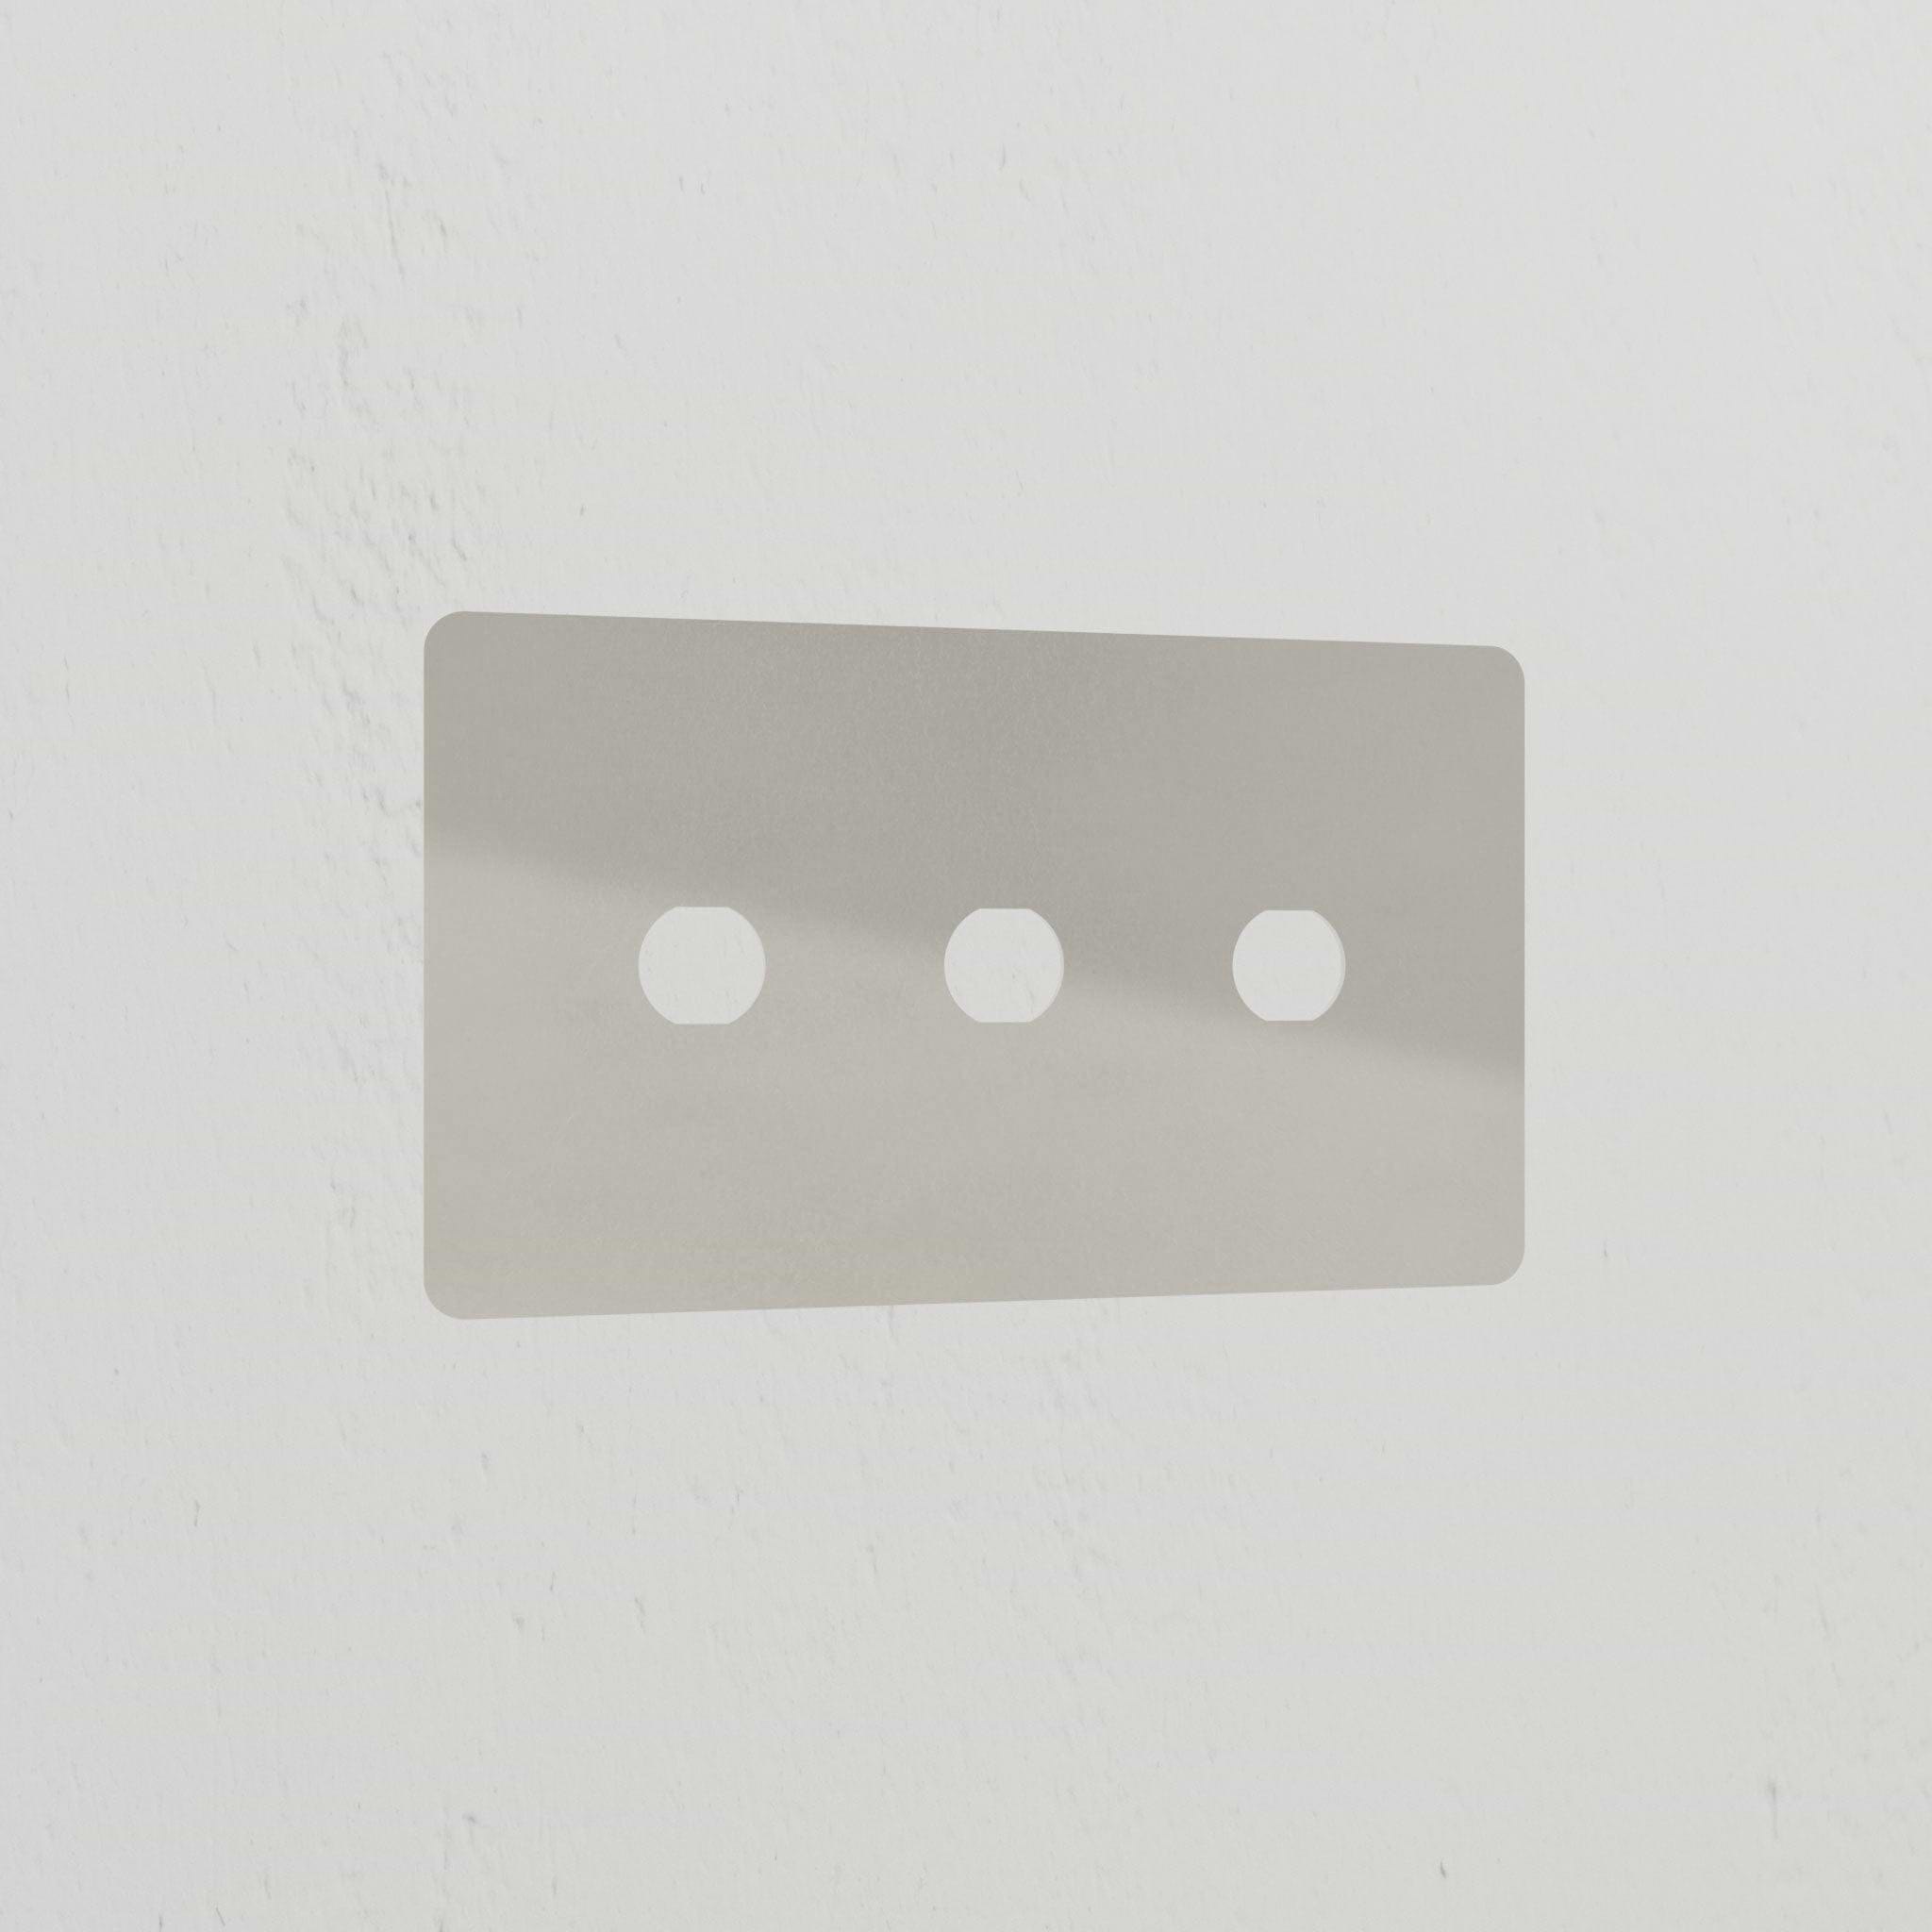 3G Switch Plate - Polished Nickel